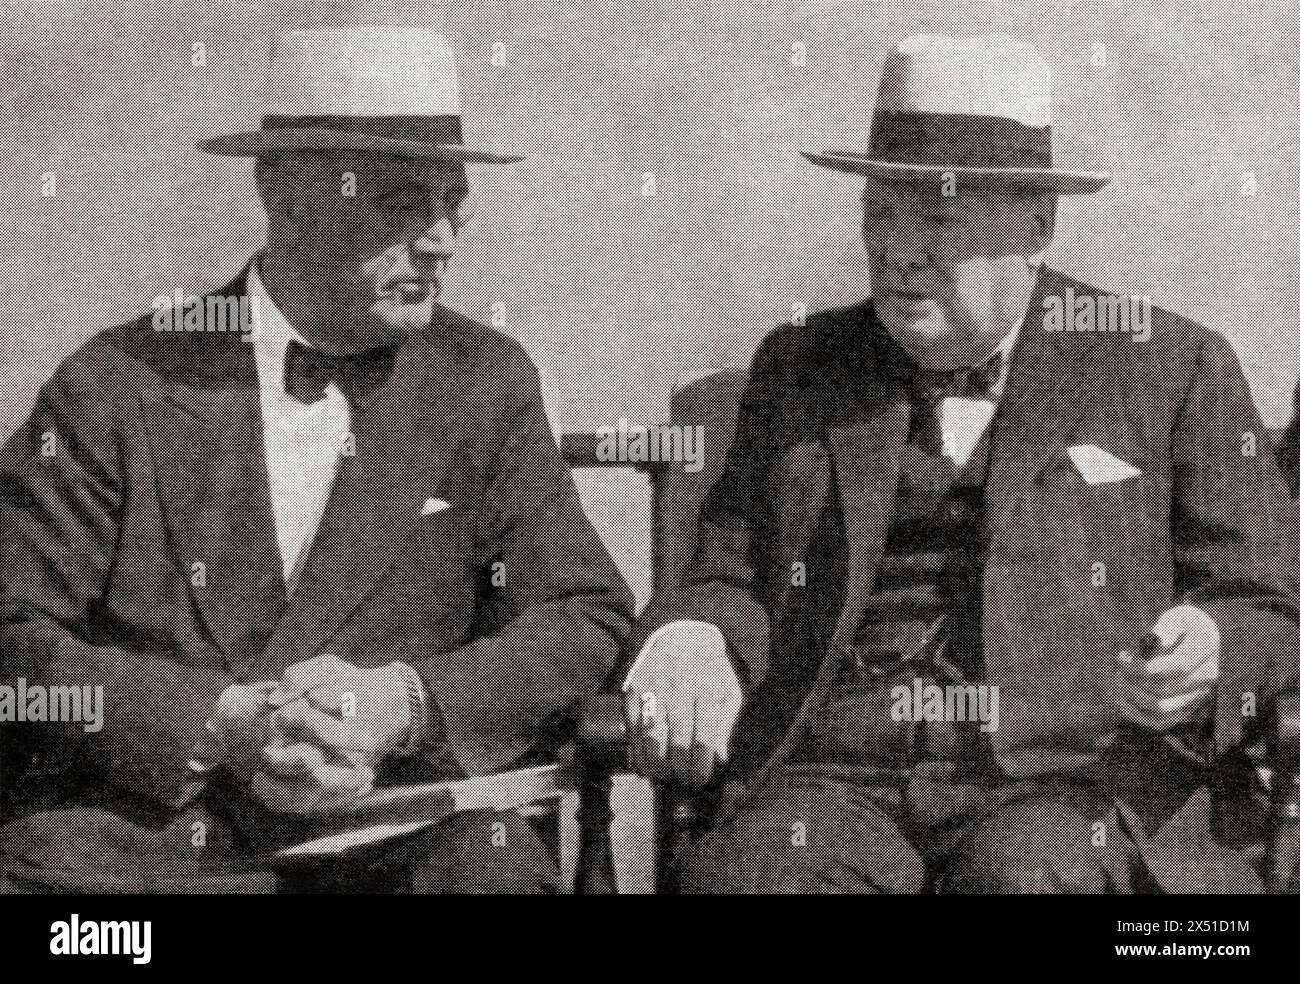 President Roosevelt and Winston Churchill, seen here at the Quebec Conference, 10-17 September, 1944.  Franklin Delano Roosevelt, 1882 –1945, commonly known by his initials FDR. American statesman, politician and 32nd president of the United States. Sir Winston Leonard Spencer-Churchill, 1874 – 1965. British politician, army officer, writer and twice Prime Minister of the United Kingdom.  From The War in Pictures, Sixth Year. Stock Photo